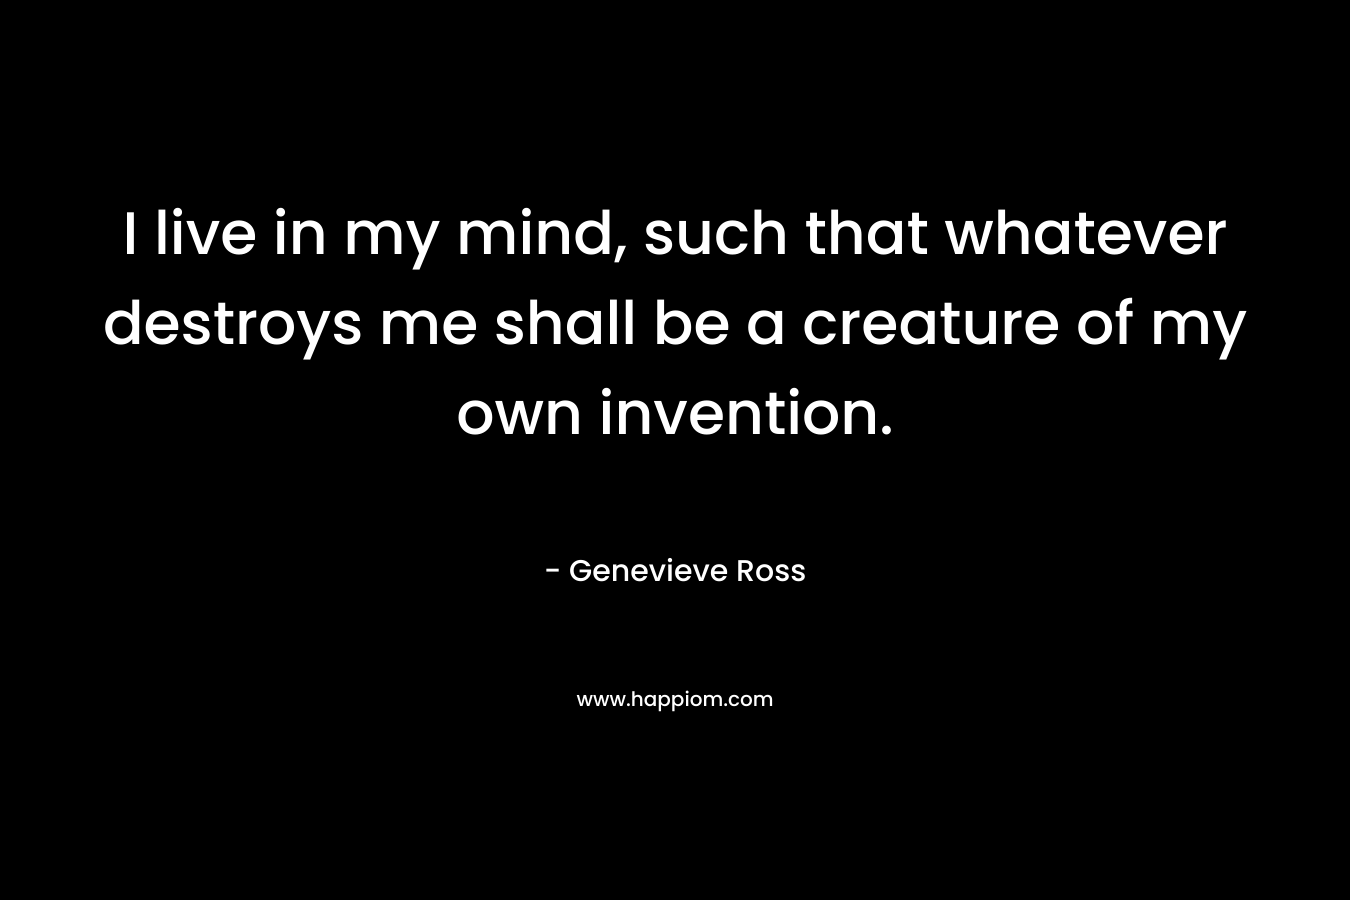 I live in my mind, such that whatever destroys me shall be a creature of my own invention. – Genevieve Ross